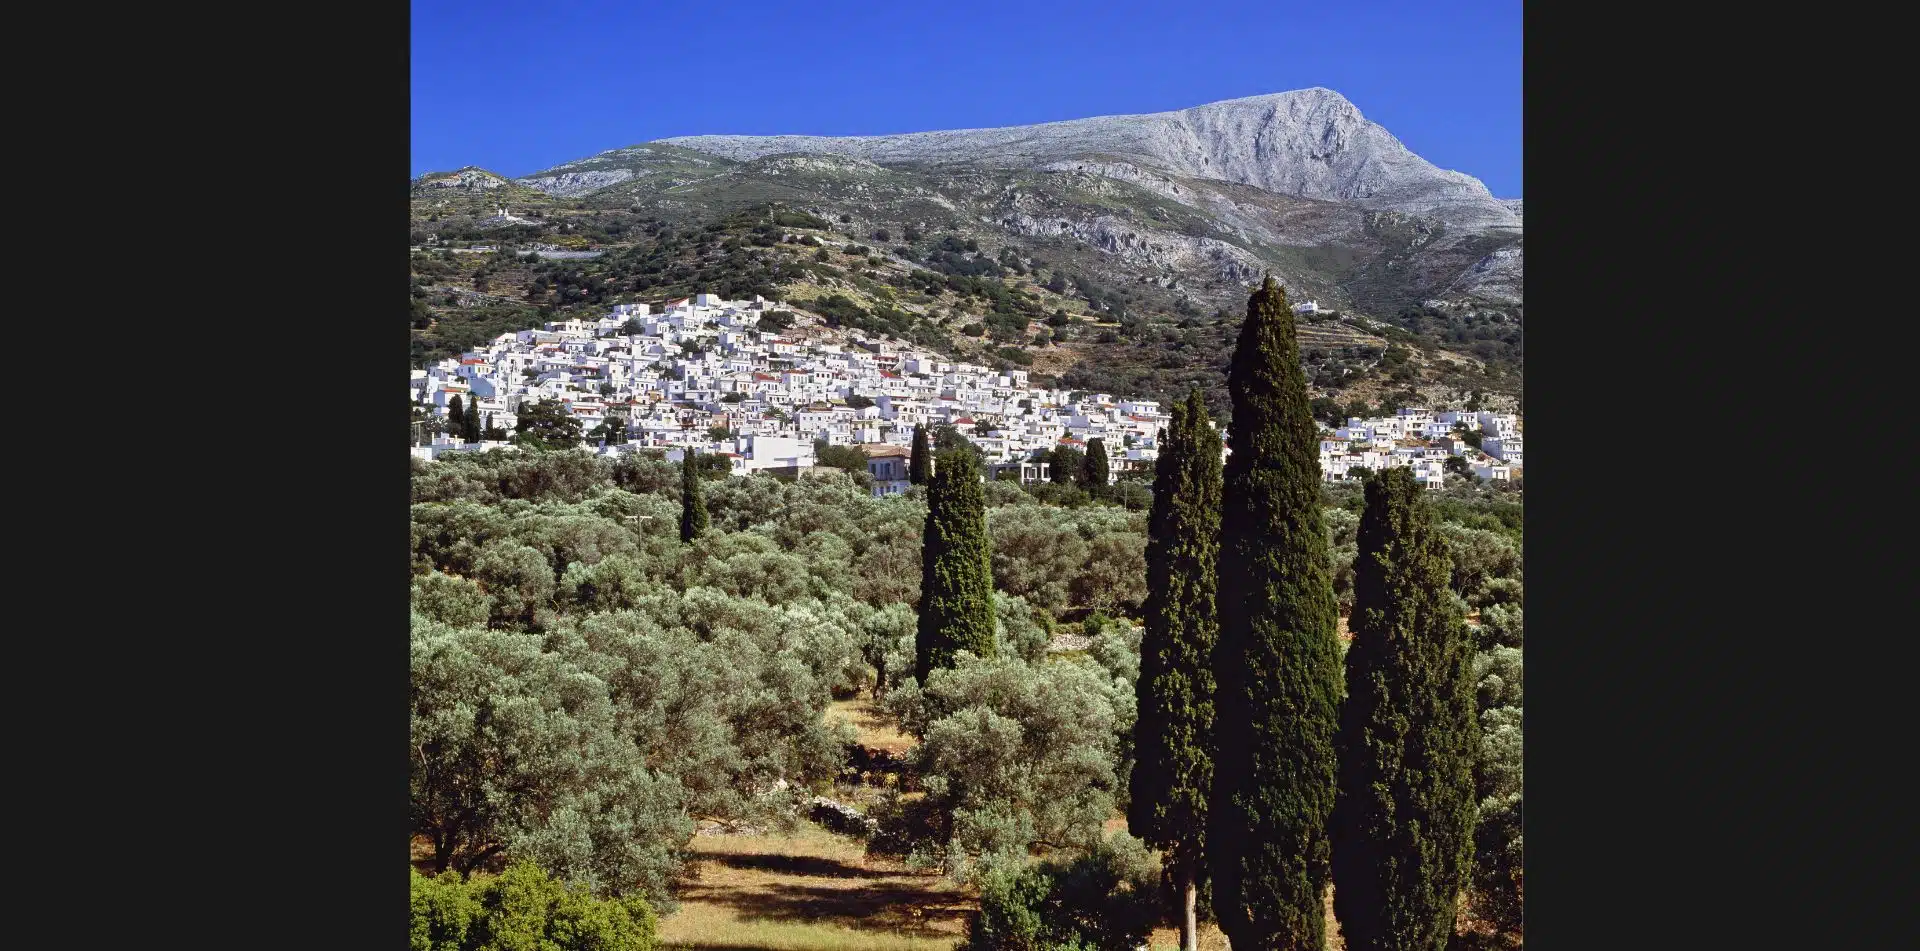 Walk through the olive groves in Naxos, Greece